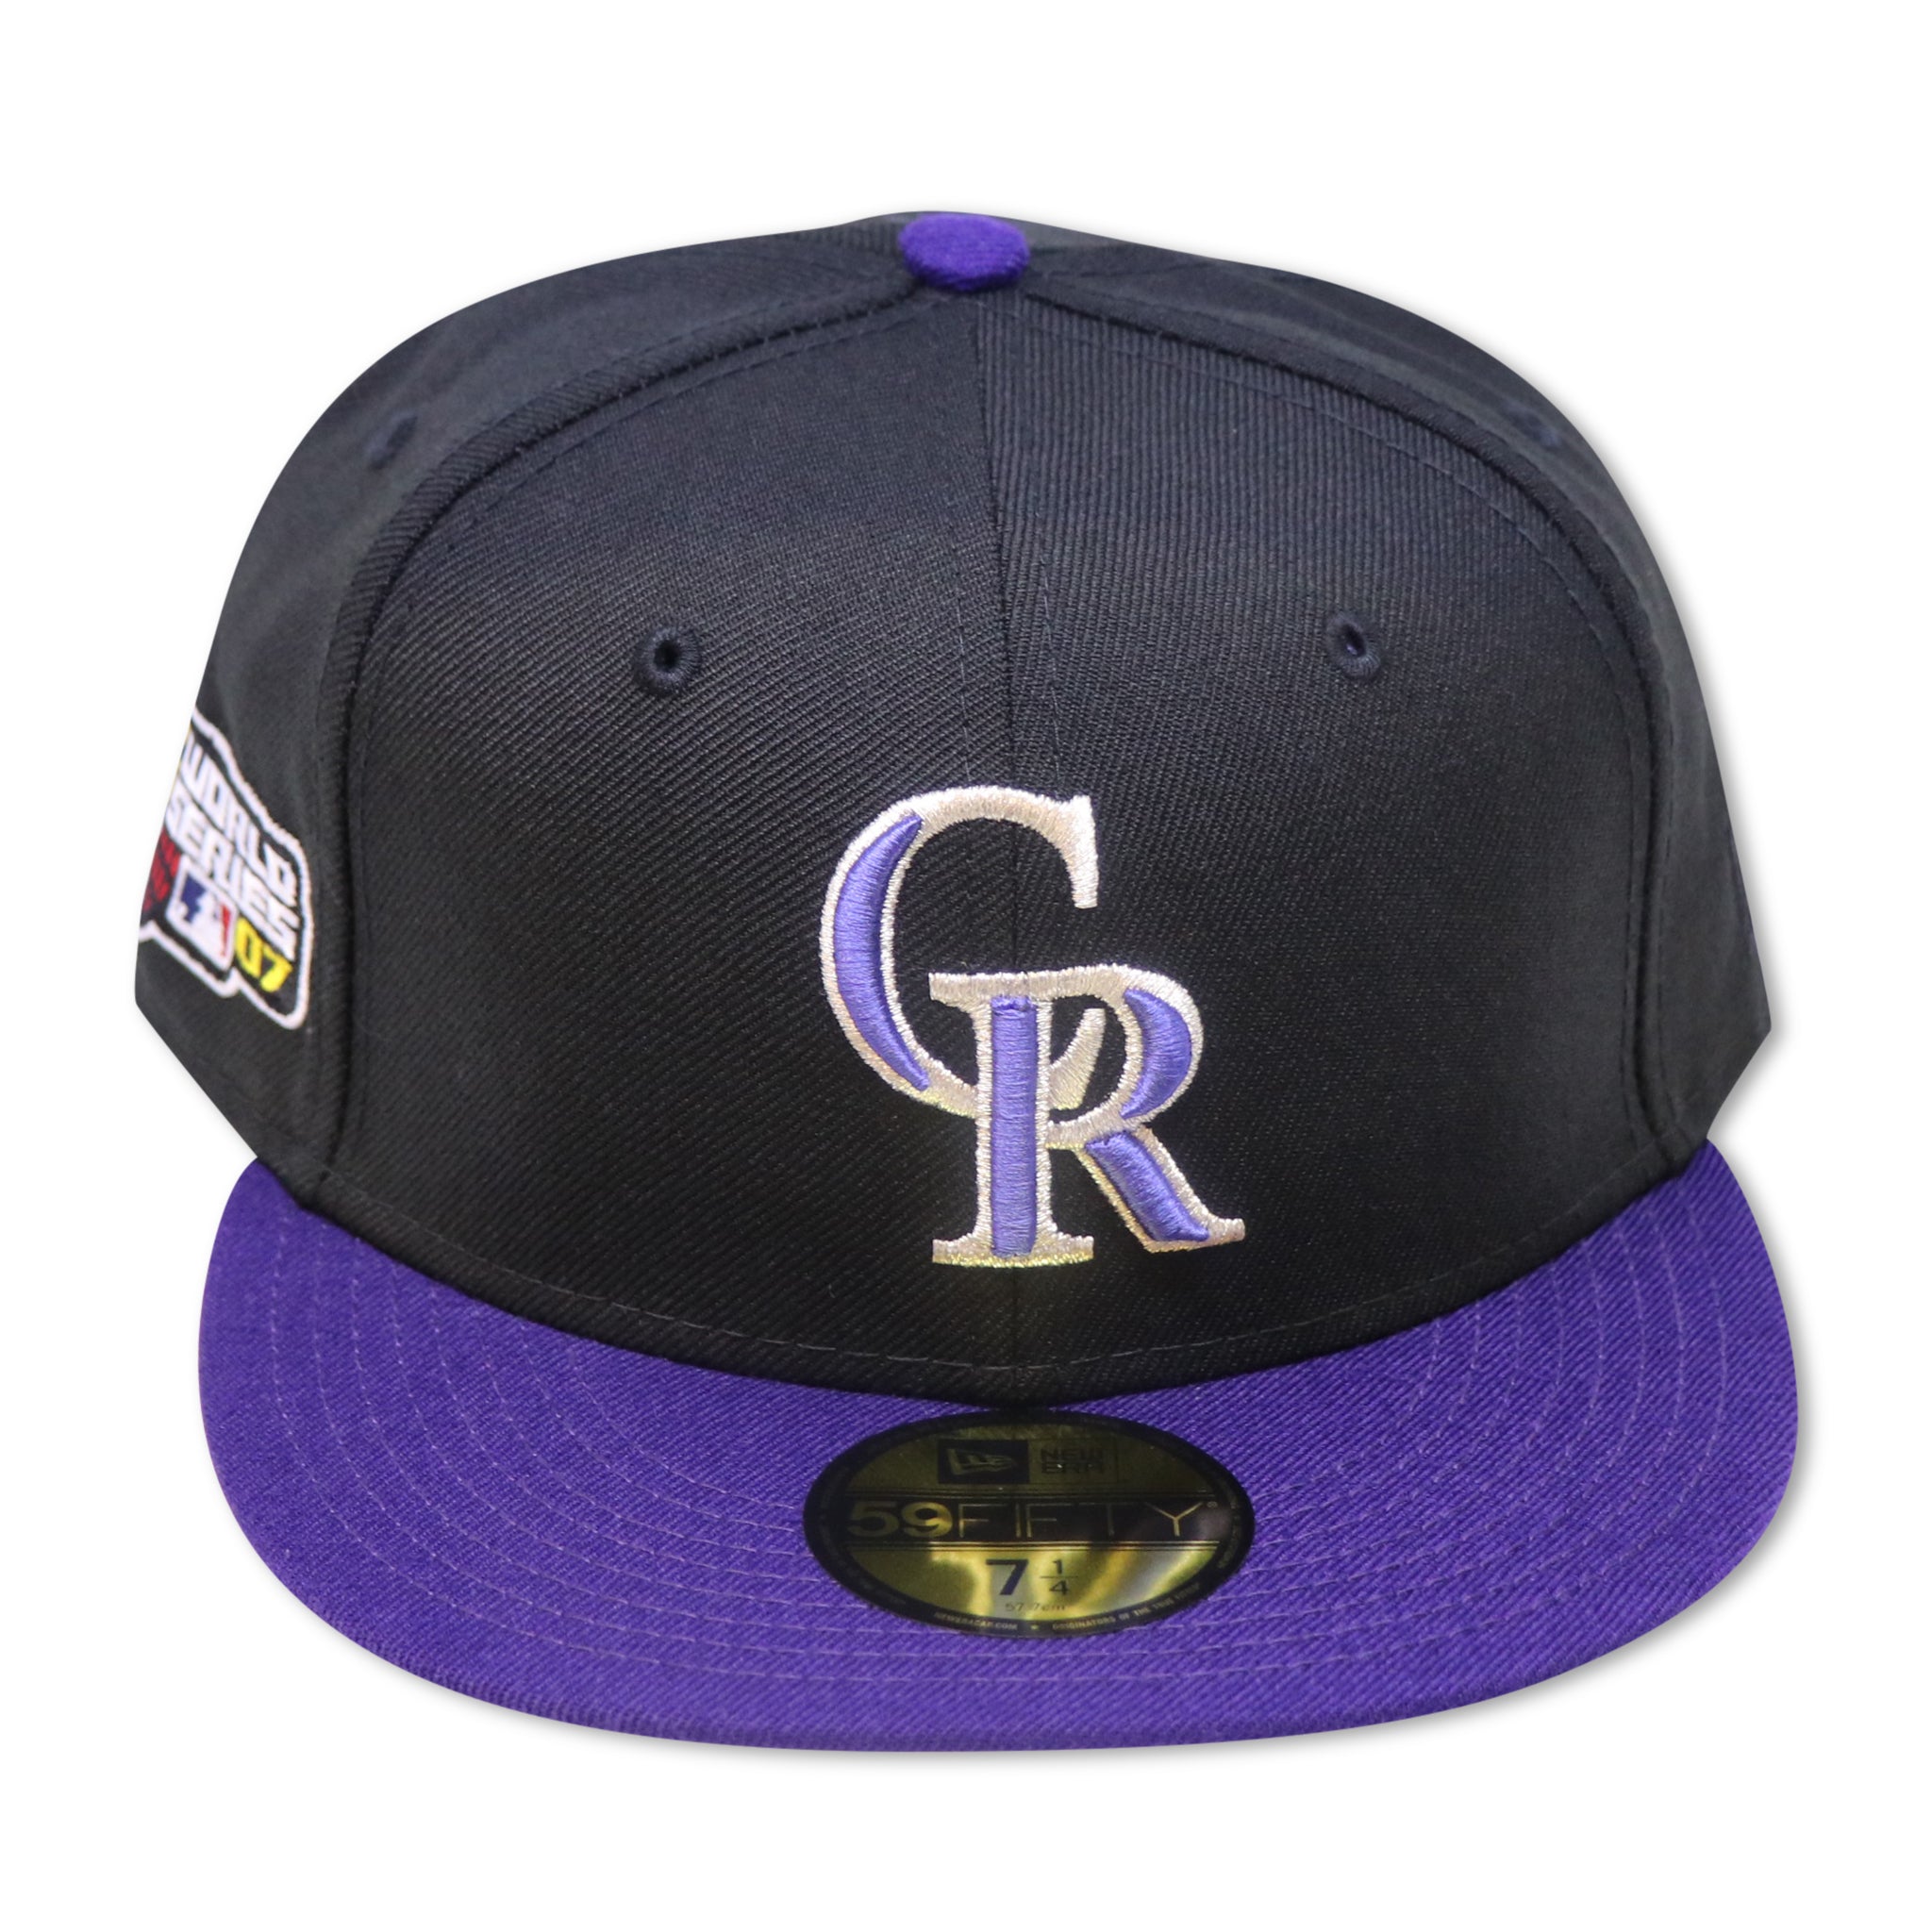 COLORADO ROCKIES NEW ERA 59FIFTY FITTED (2007 WORLD SERIES) FITTED (GRAY UNDER BRIM)